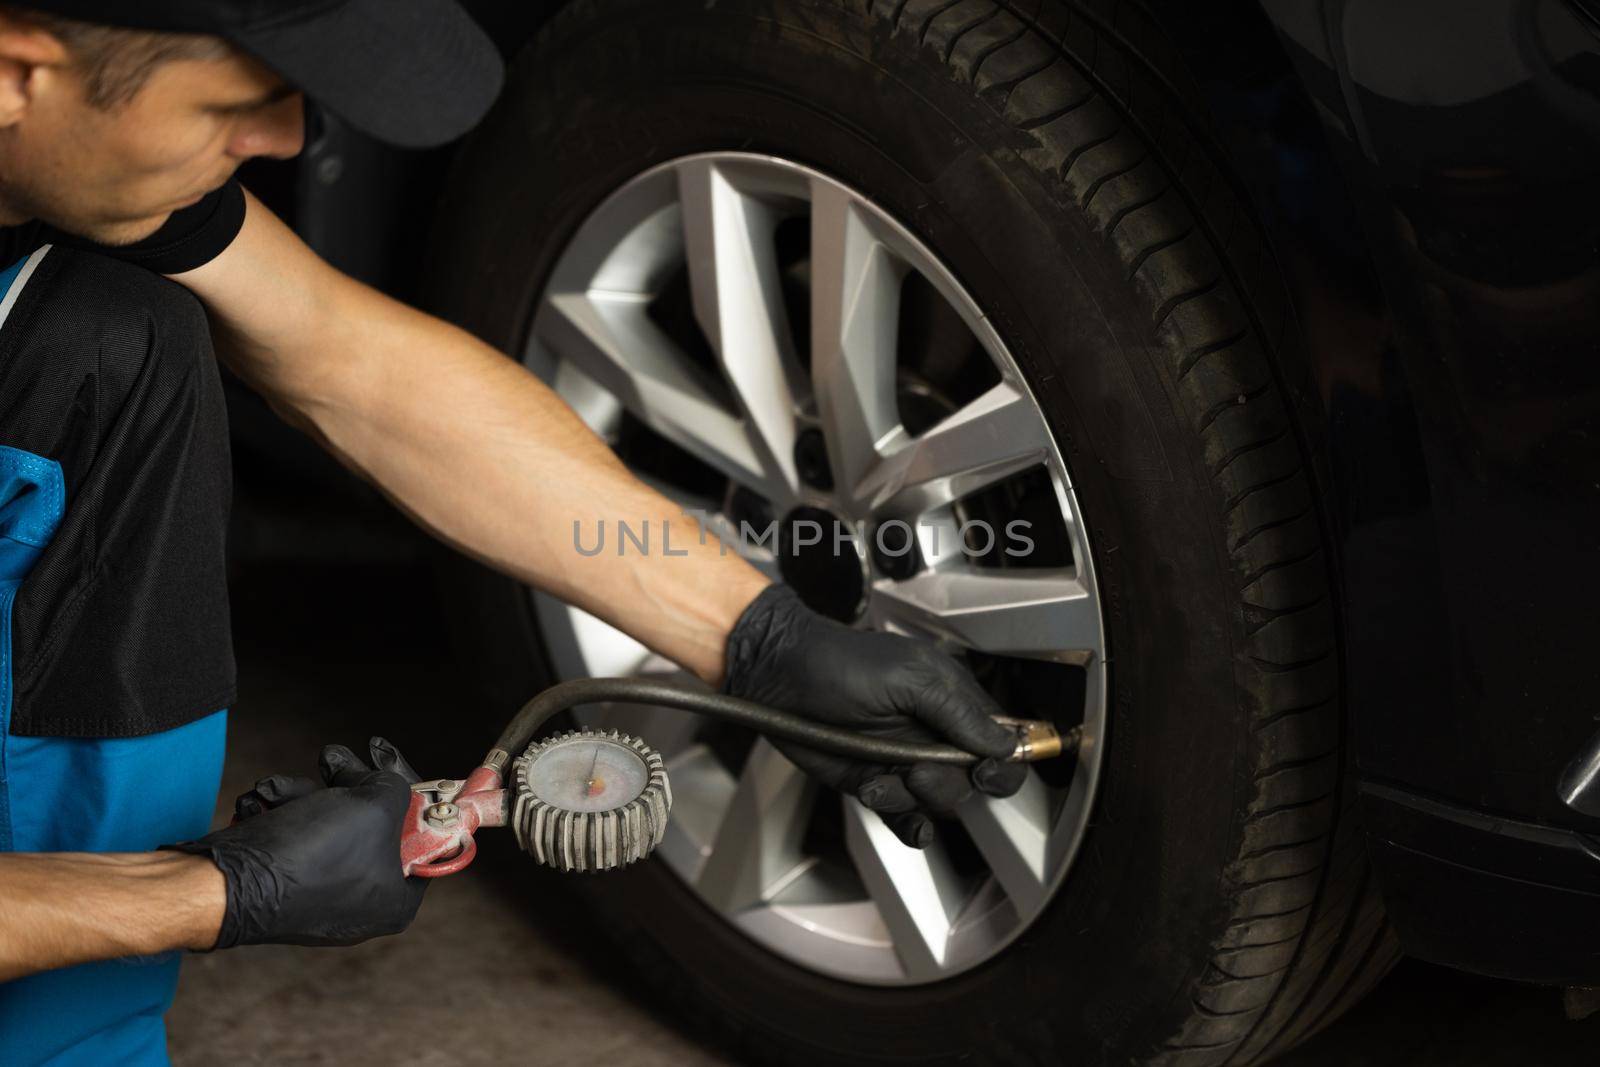 Gas pumping of a car wheel. Car tire inflation. Car tire pressure check using air pressure guage. Mechanic inflating a car tire by uflypro